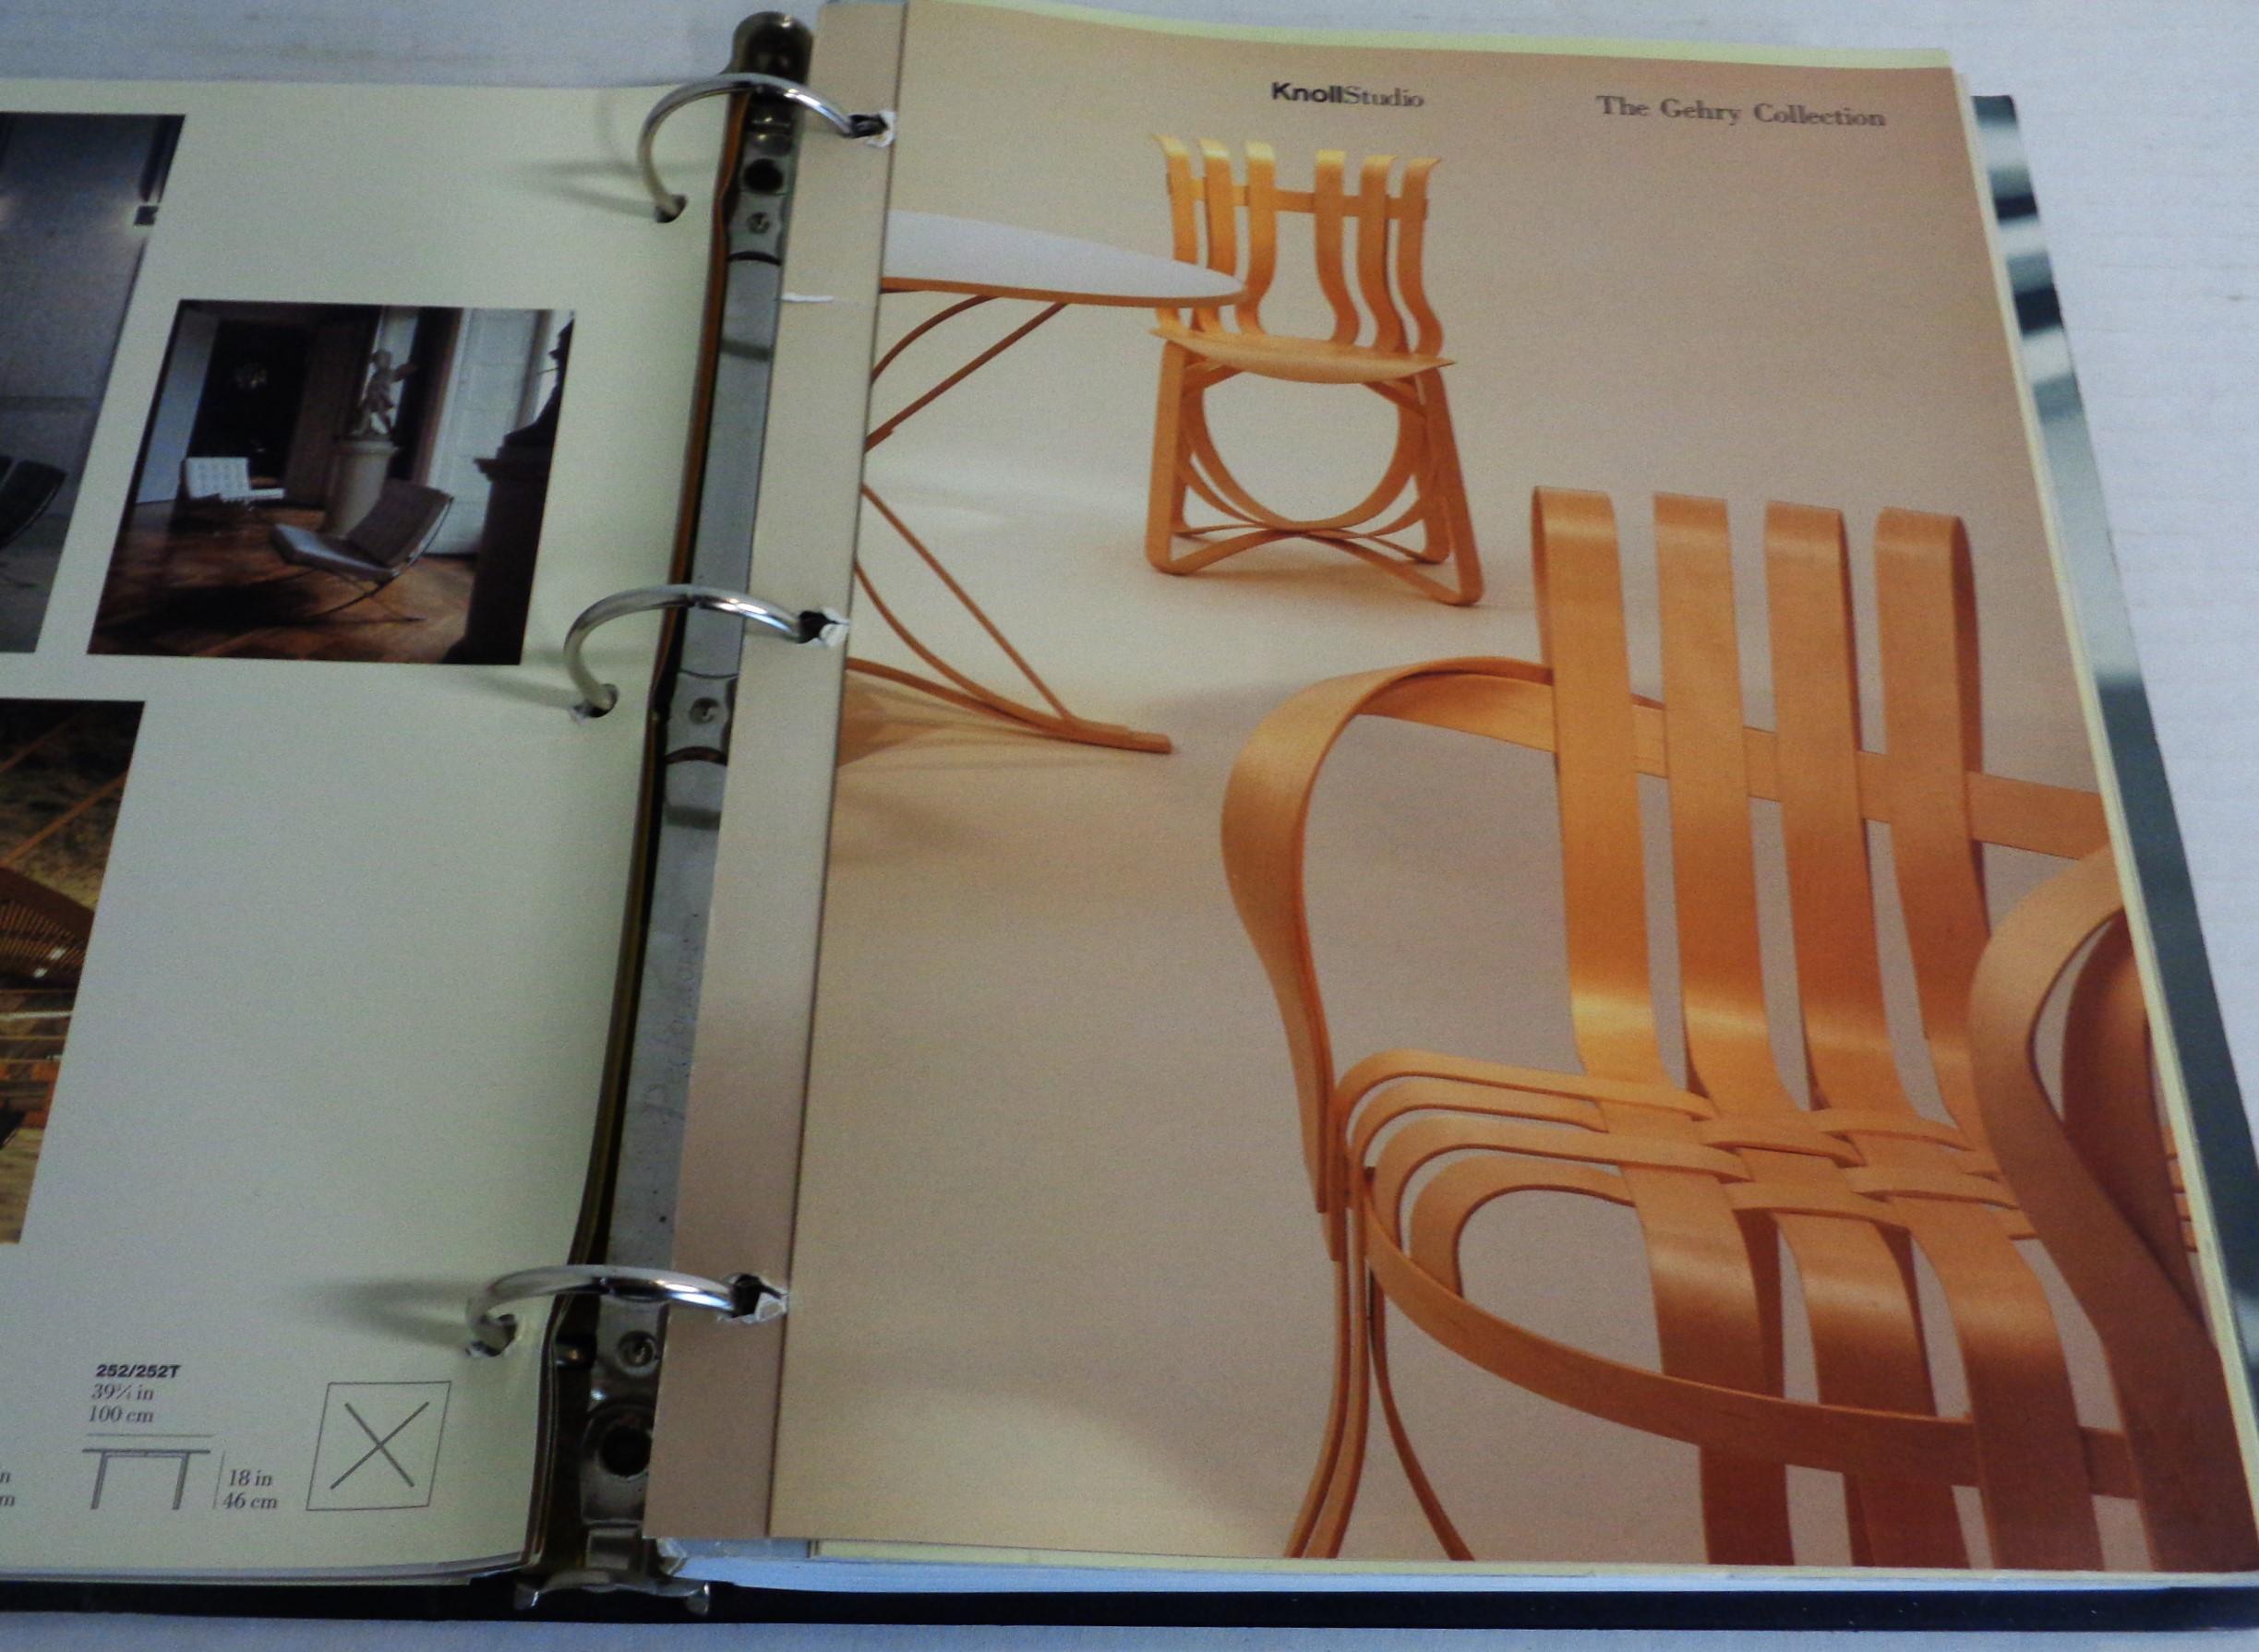 American Knoll Studio Collection - Binder - Catalogues - Price List - Year 2000 For Sale